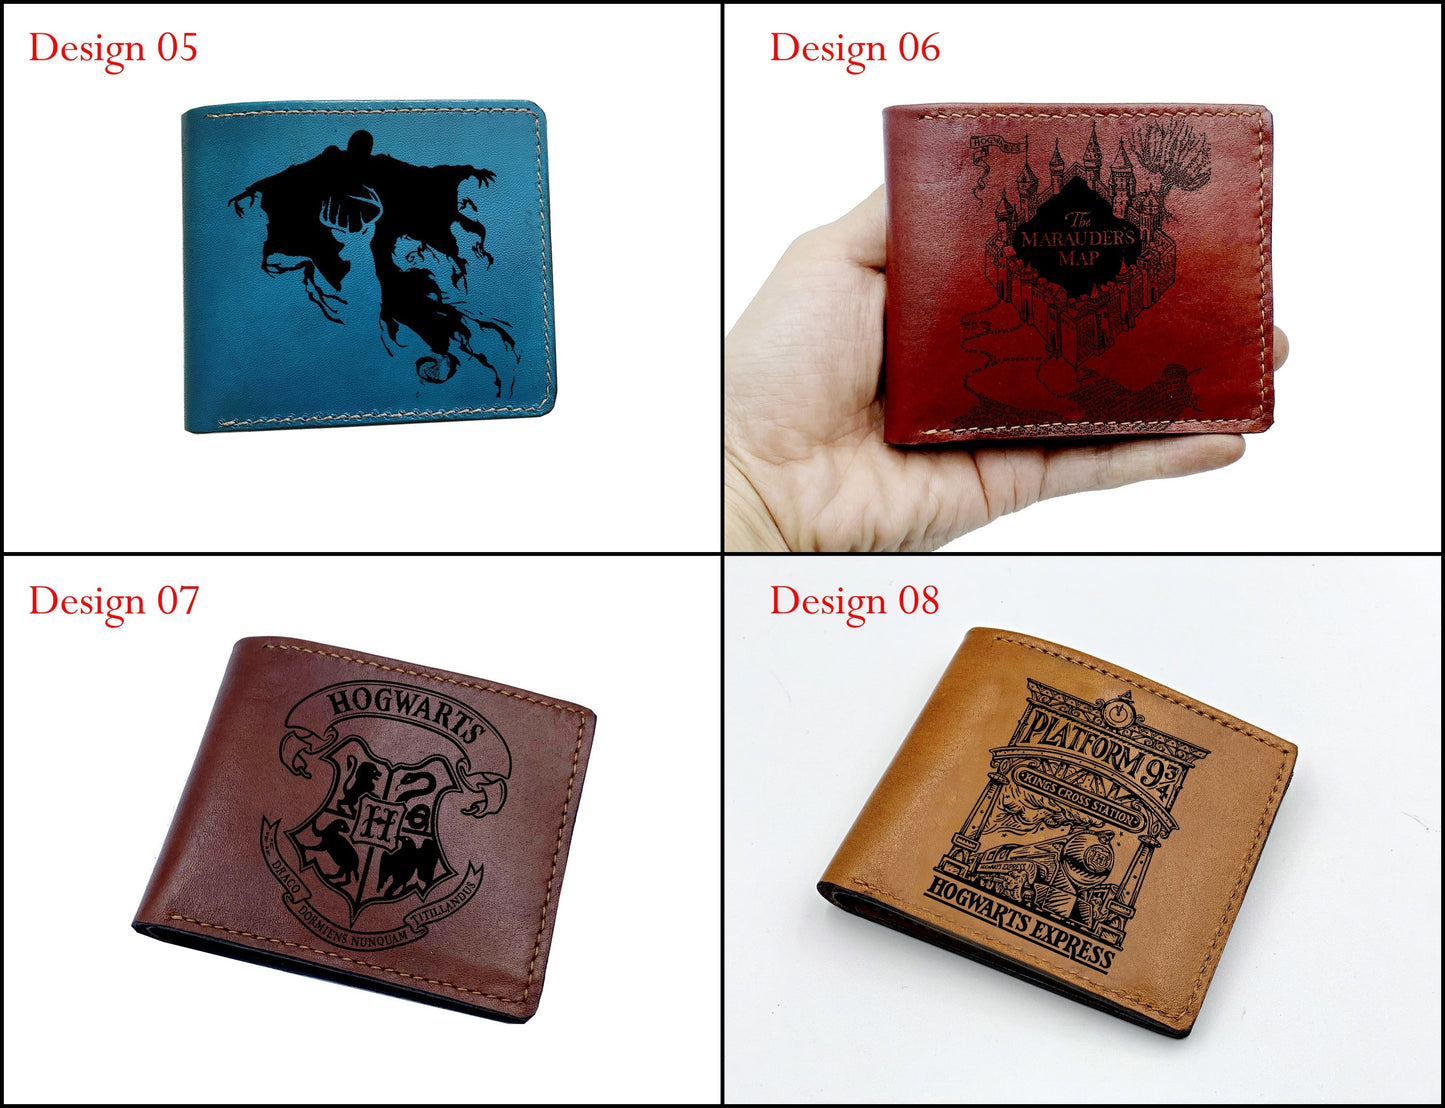 Mayan Corner - Custom leather wallet, Harry Porter Hogwarts School of Witchcraft and Wizardry logo houses wallet, leather gift for boyfriend